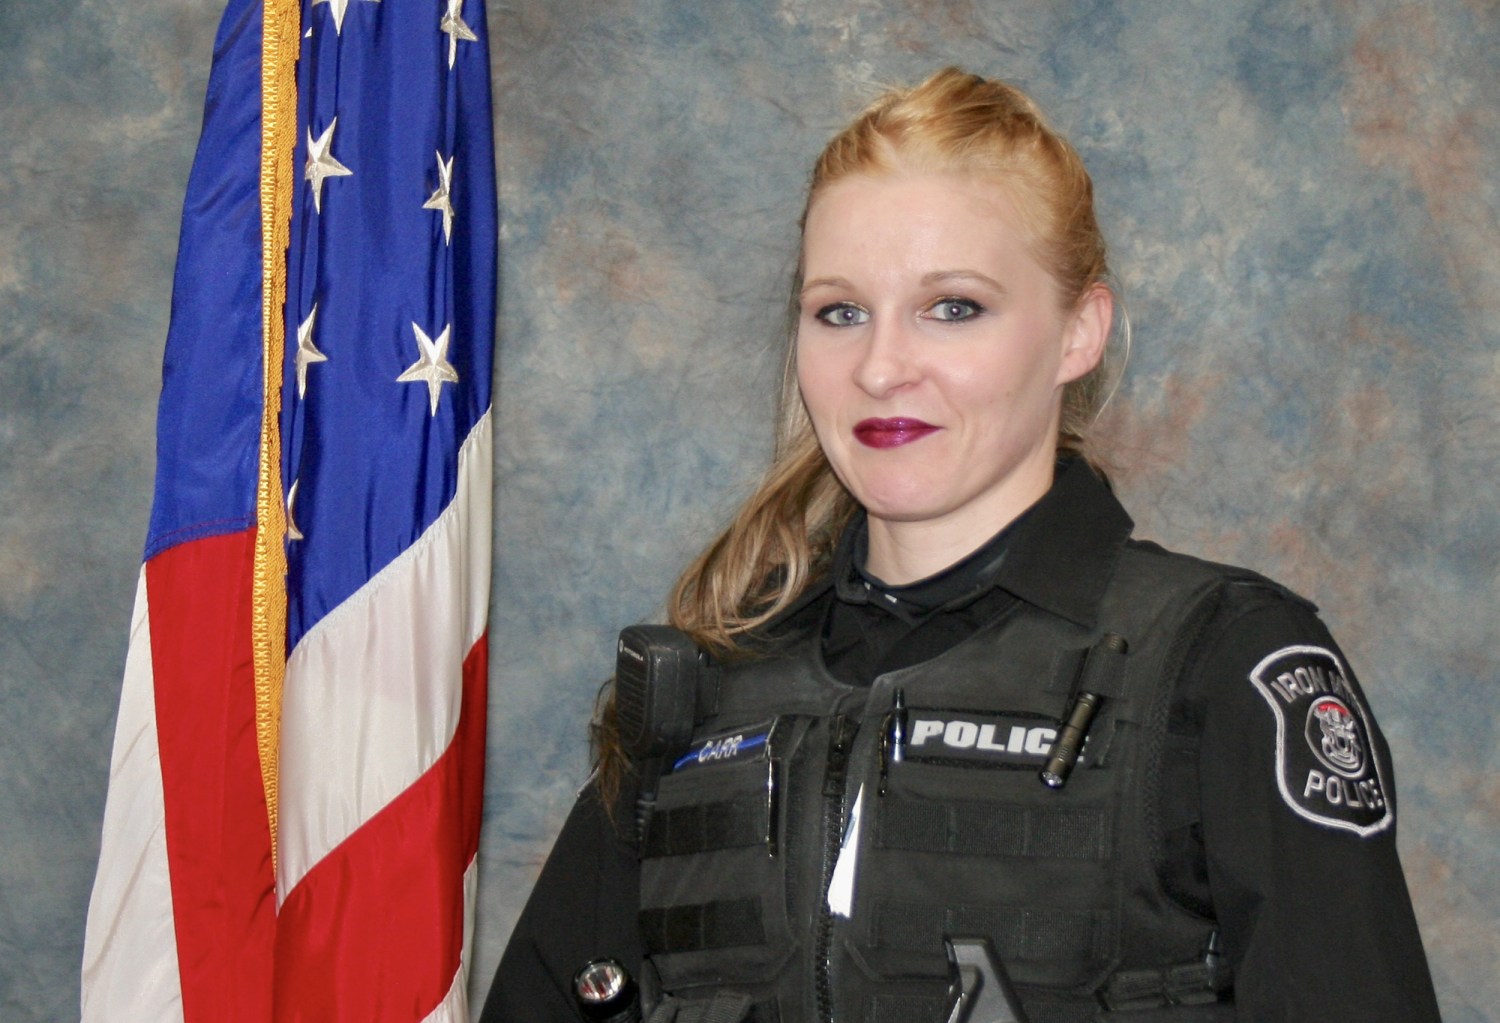 Michigan departments first female cop alleges relentless harassment pic